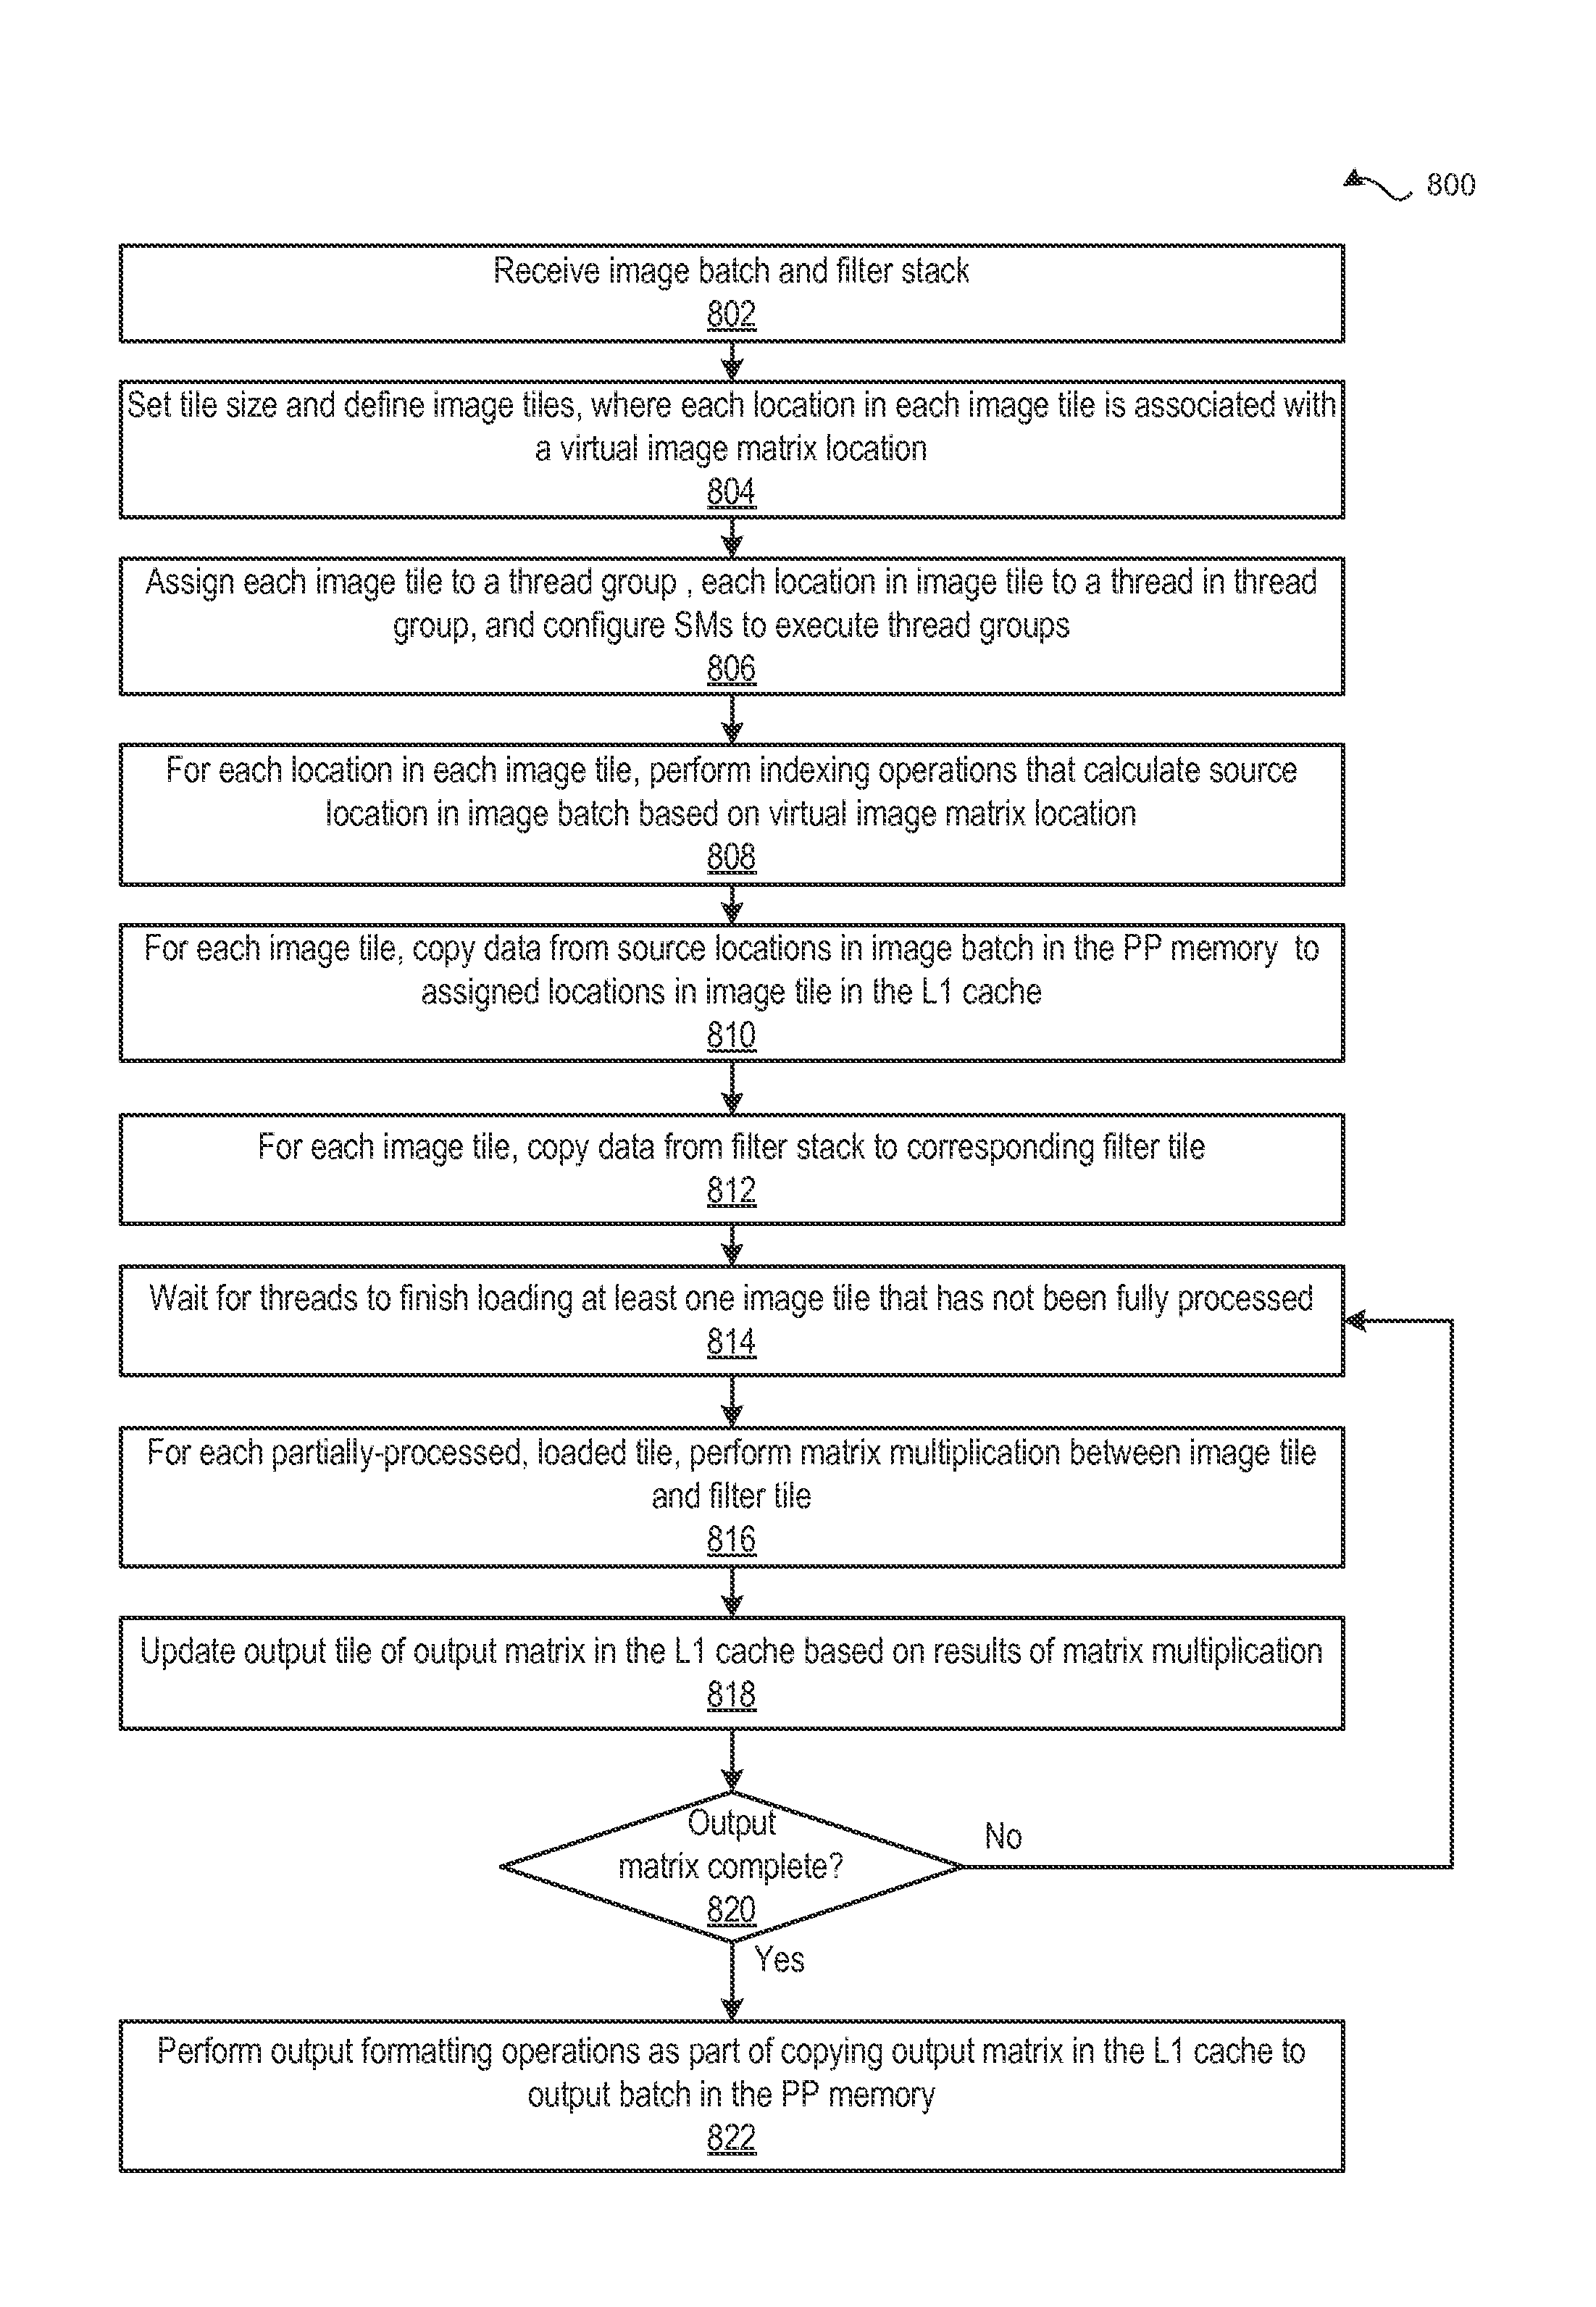 Performing multi-convolution operations in a parallel processing system